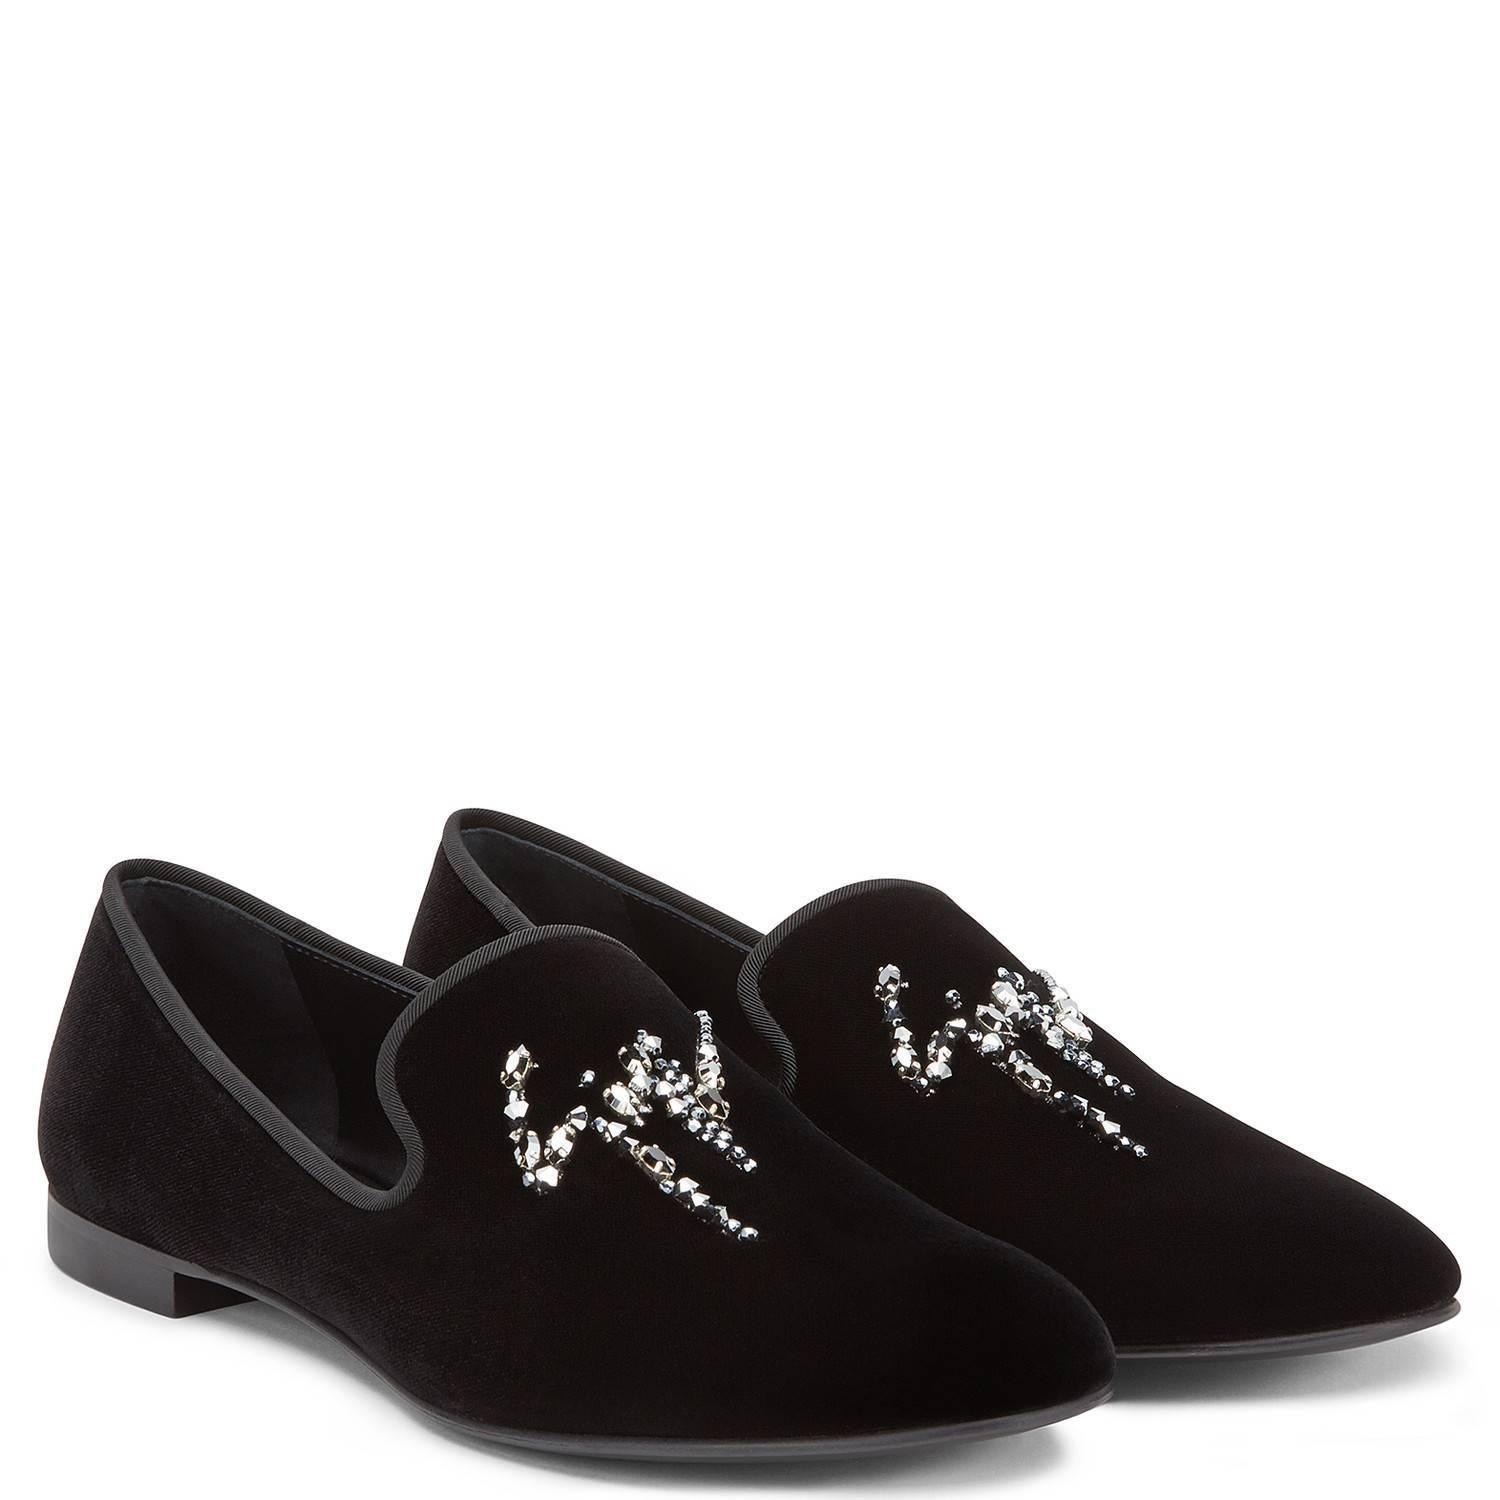 CURATOR'S NOTES

Giuseppe Zanotti New Men's Black Suede Crystal Loafers Smoking Slippers in Box  

Size IT 41.5 (US 8.5)
Suede
Crystal
Slip on
Made in Italy
Heel height ~0.75"
Includes original Giuseppe Zanotti box